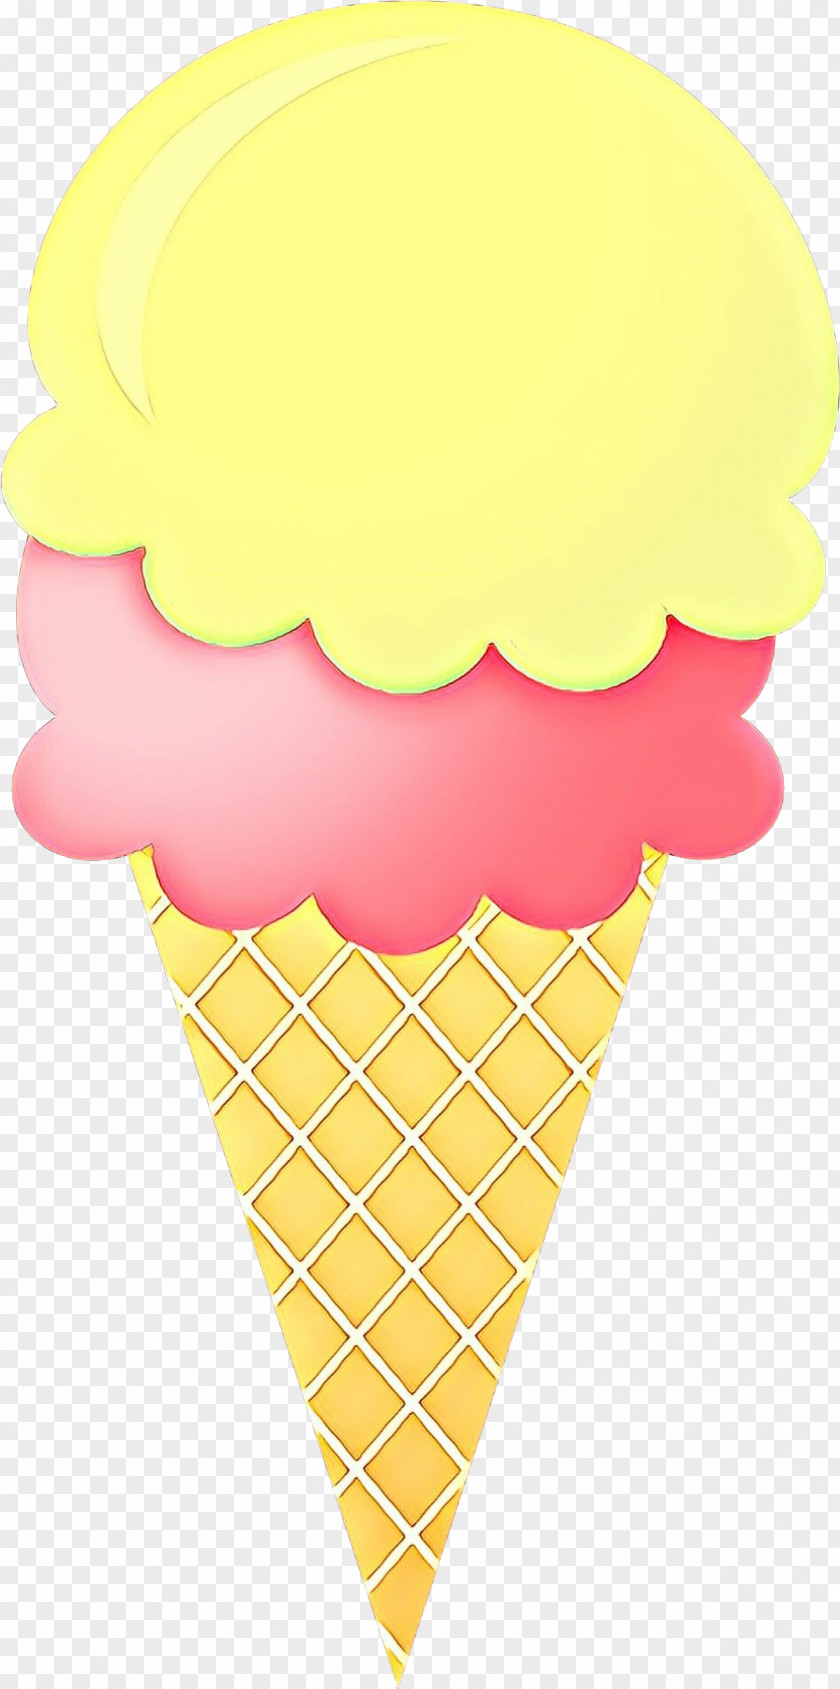 American Food Dairy Ice Cream Cone Background PNG